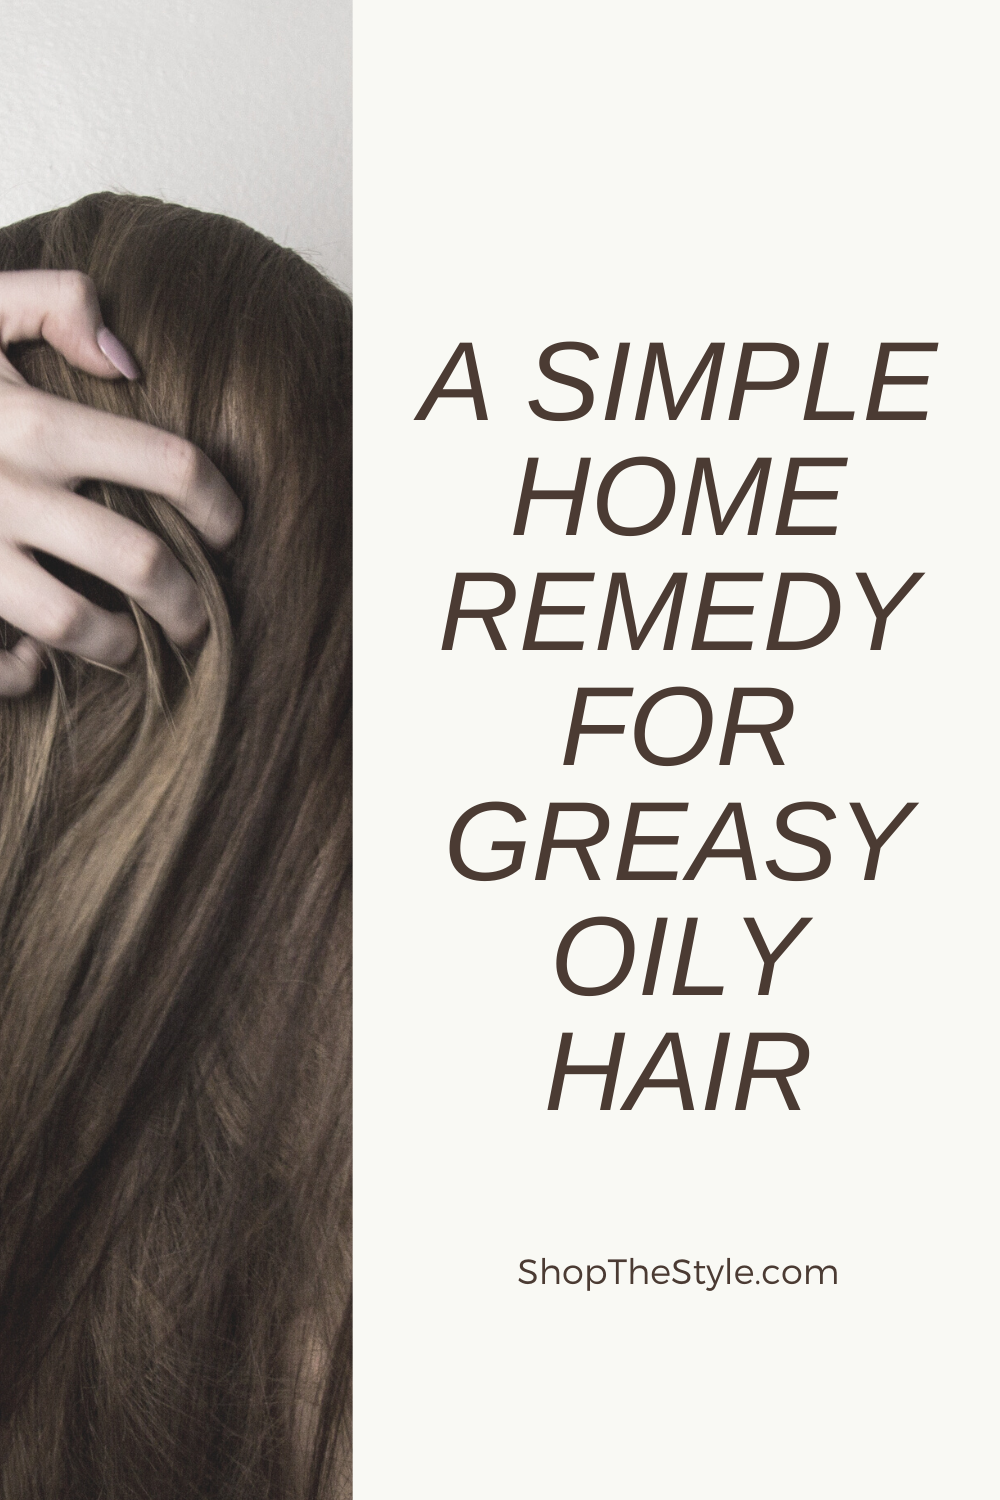 A Simple Home Remedy For Greasy Oily Hair